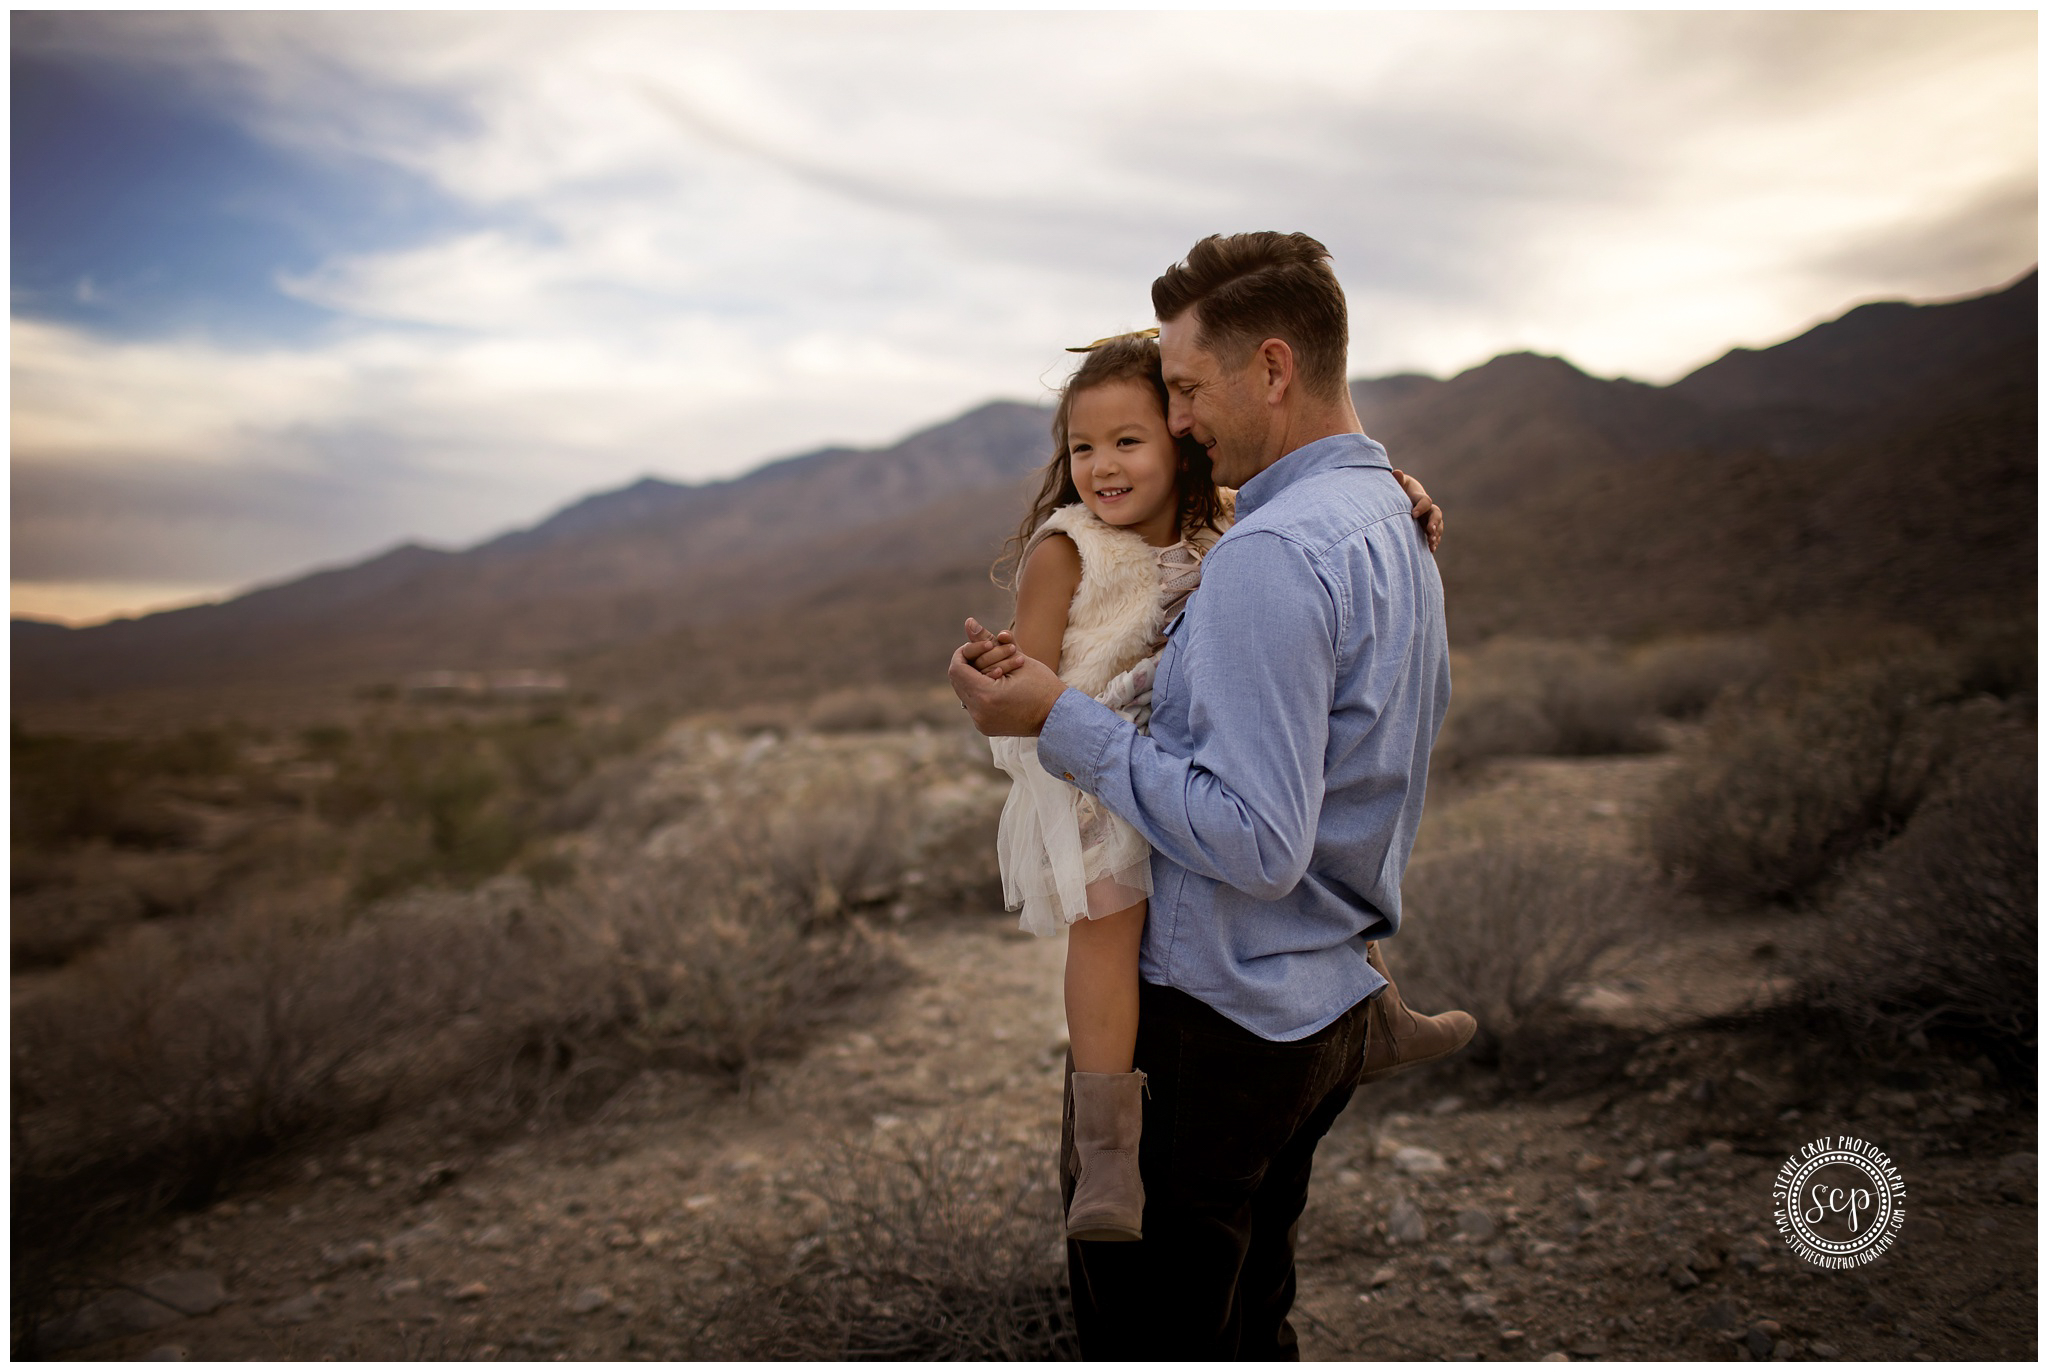 Photo of dad carrying his little girl in Palm Desert California. These family pictures are so precious